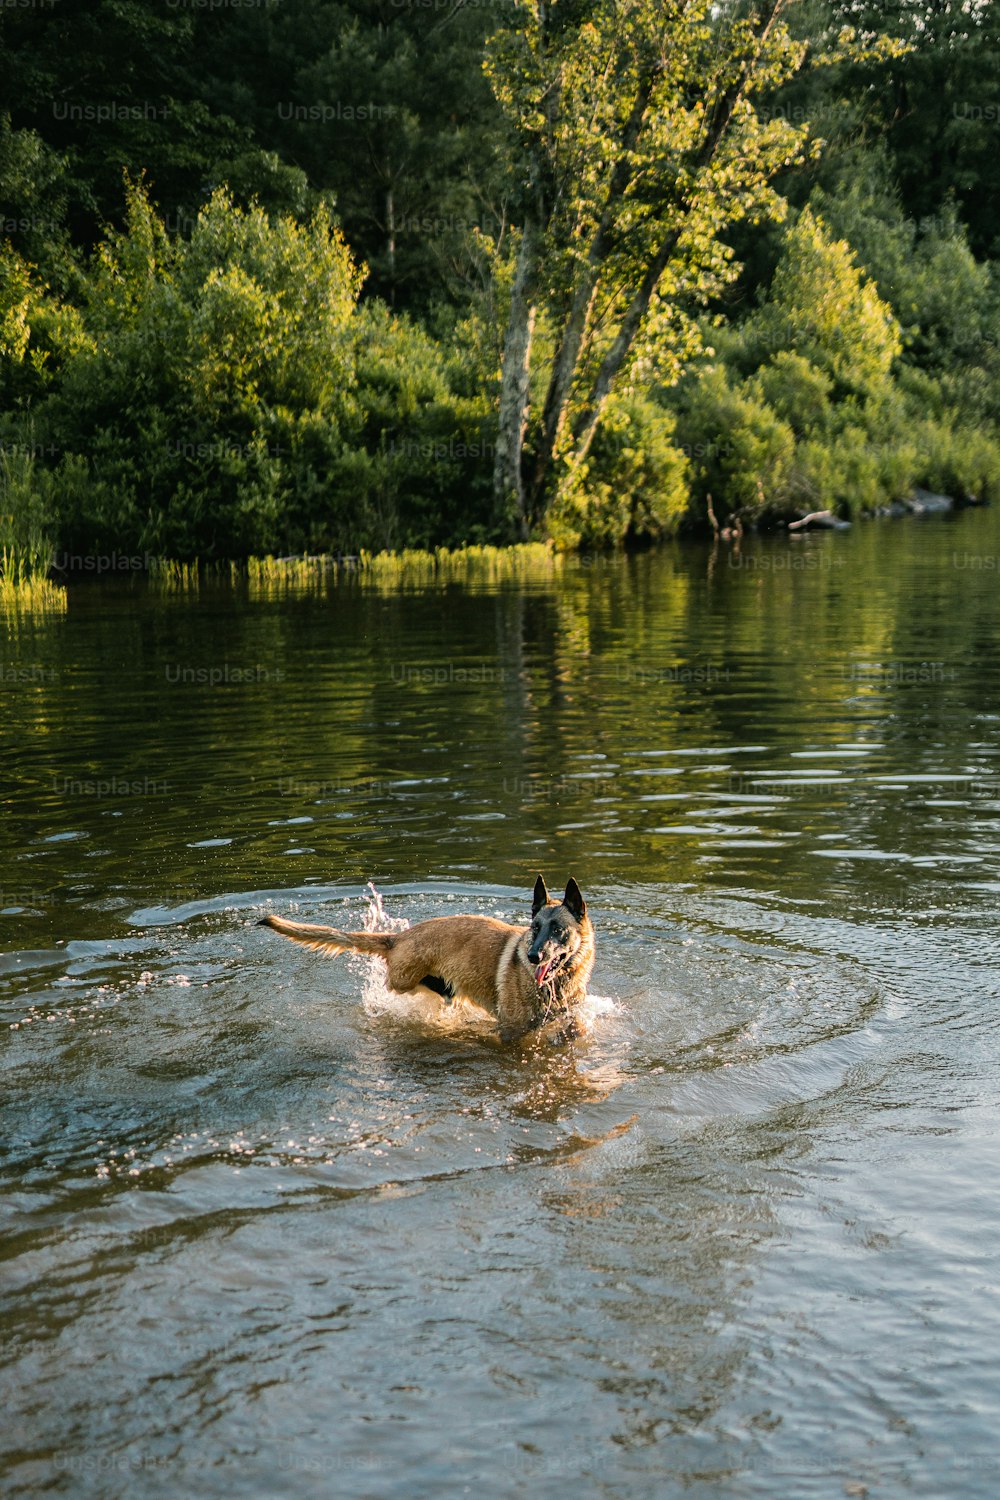 a dog is swimming in a lake with trees in the background